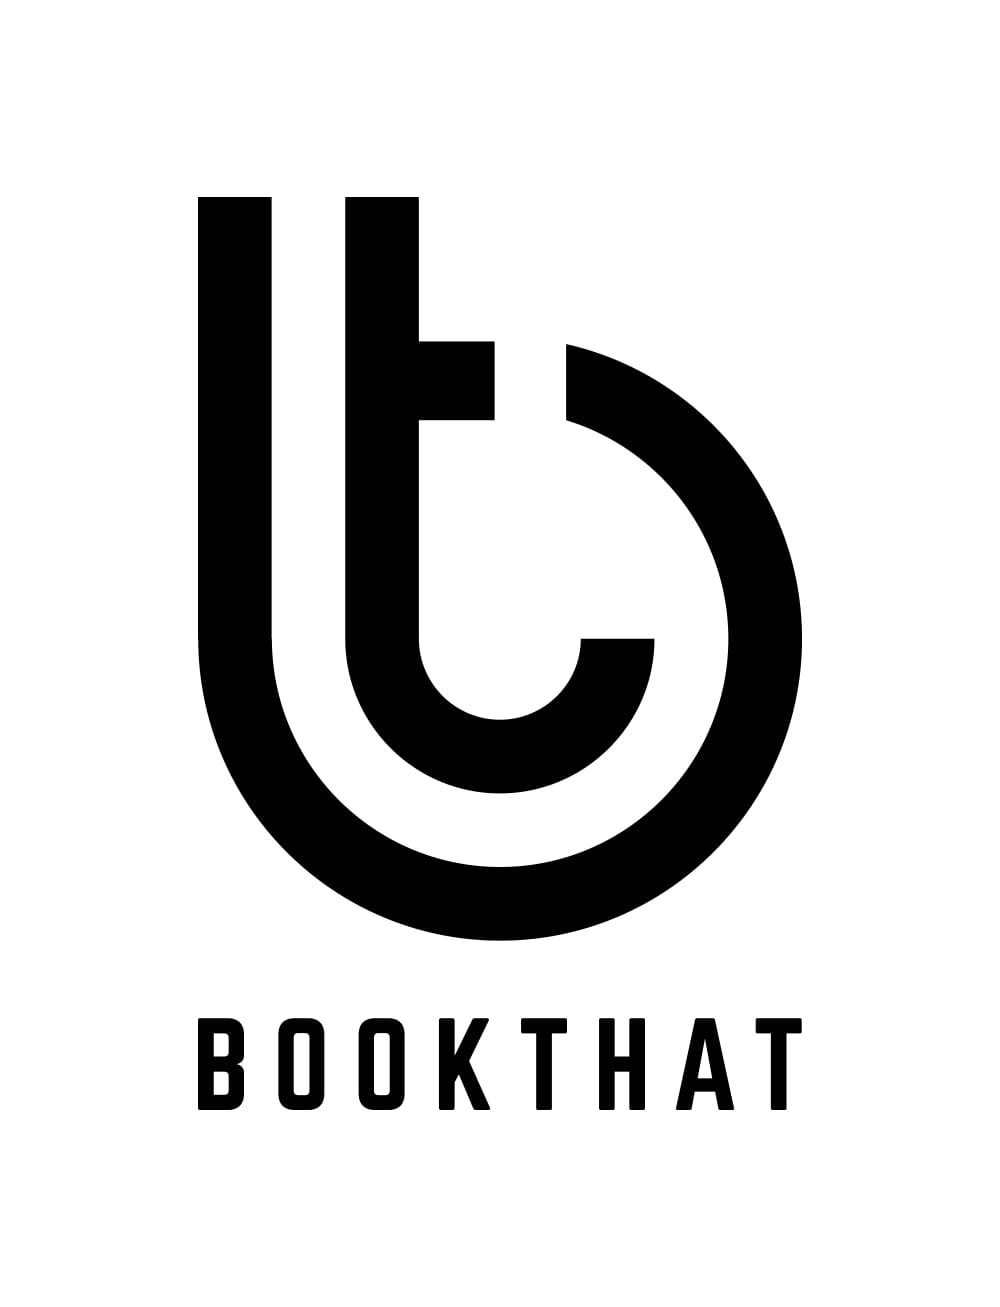 BookThat